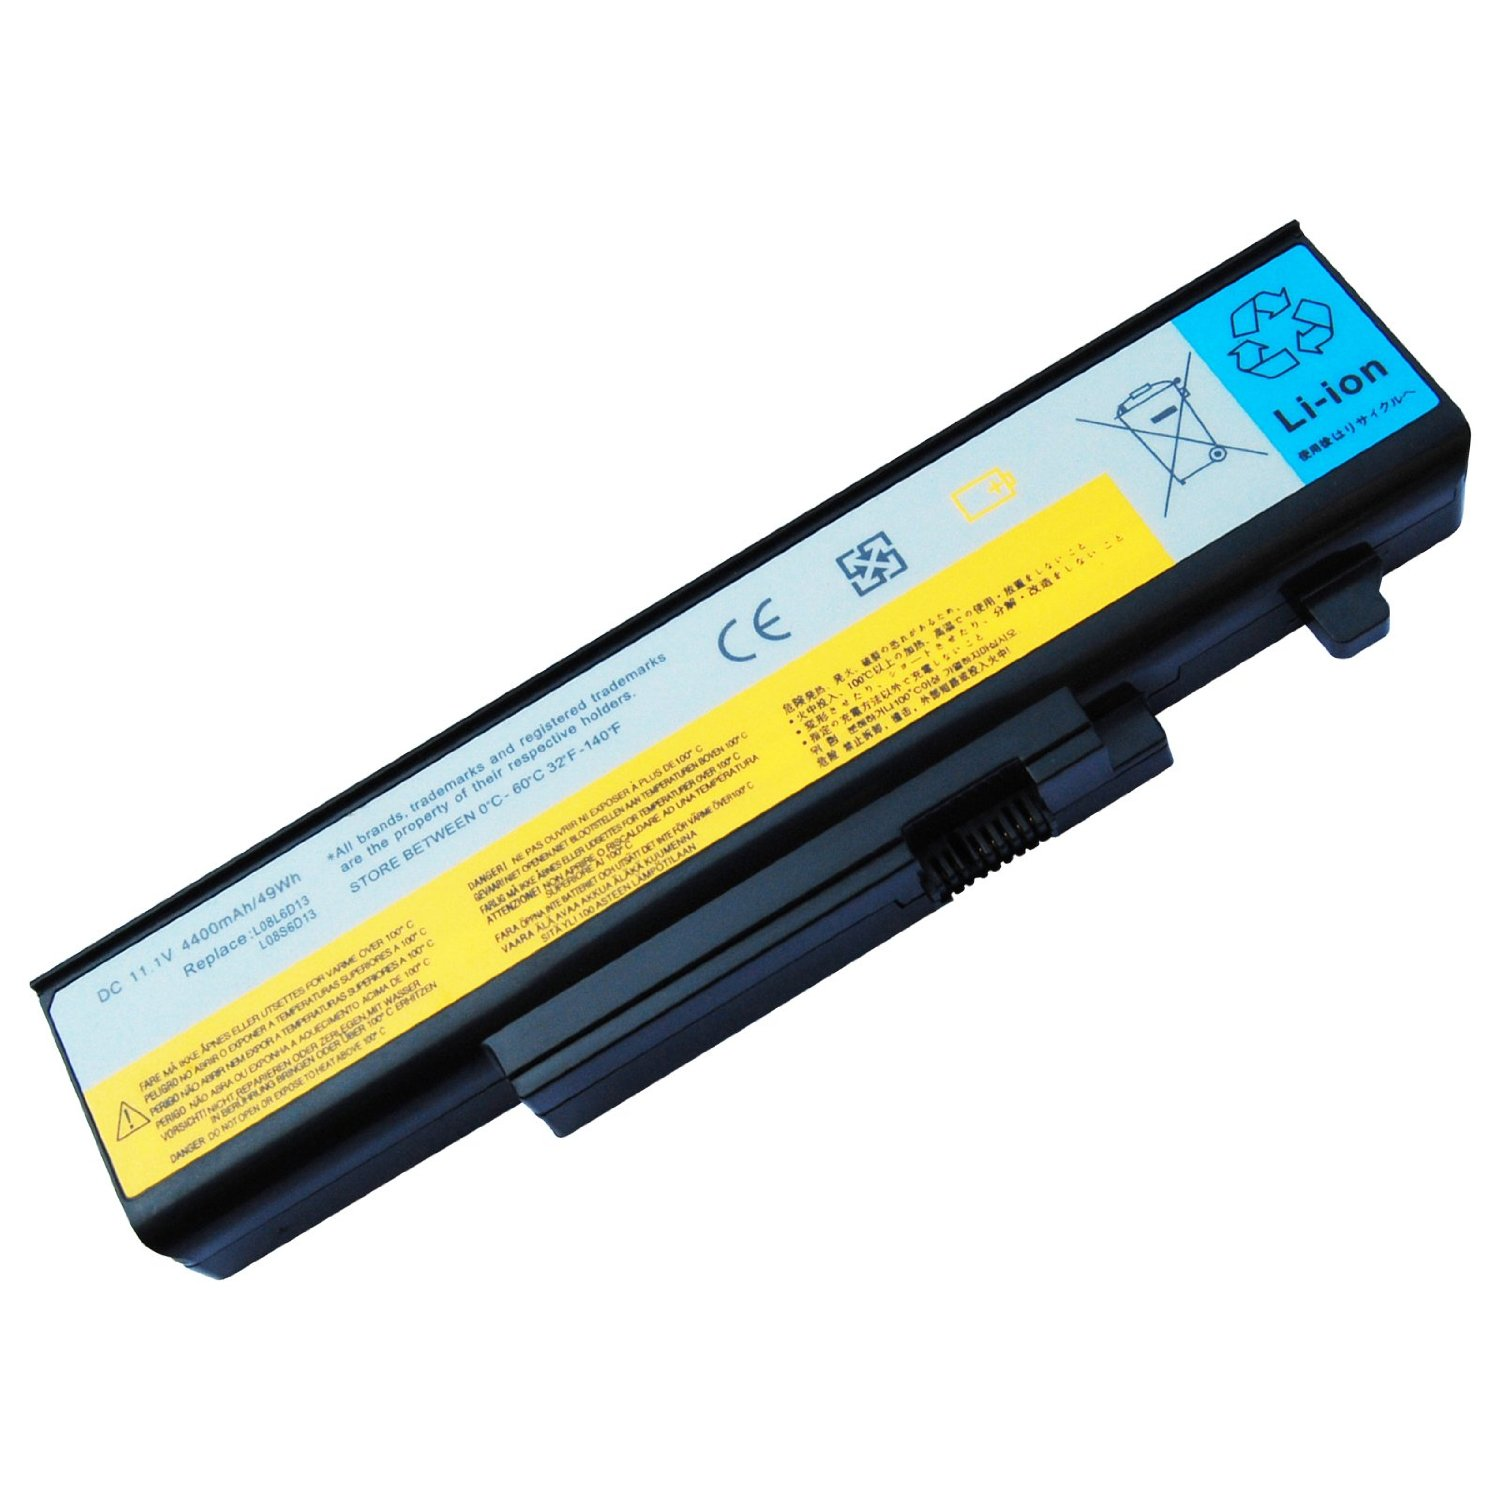 LENOVO-Y450 Y550: Laptop Battery 6-cell for LENOVO IdeaPad Y450G IdeaPad Y550 4186 IdeaPad Y550 IdeaPad Y550A Y550P